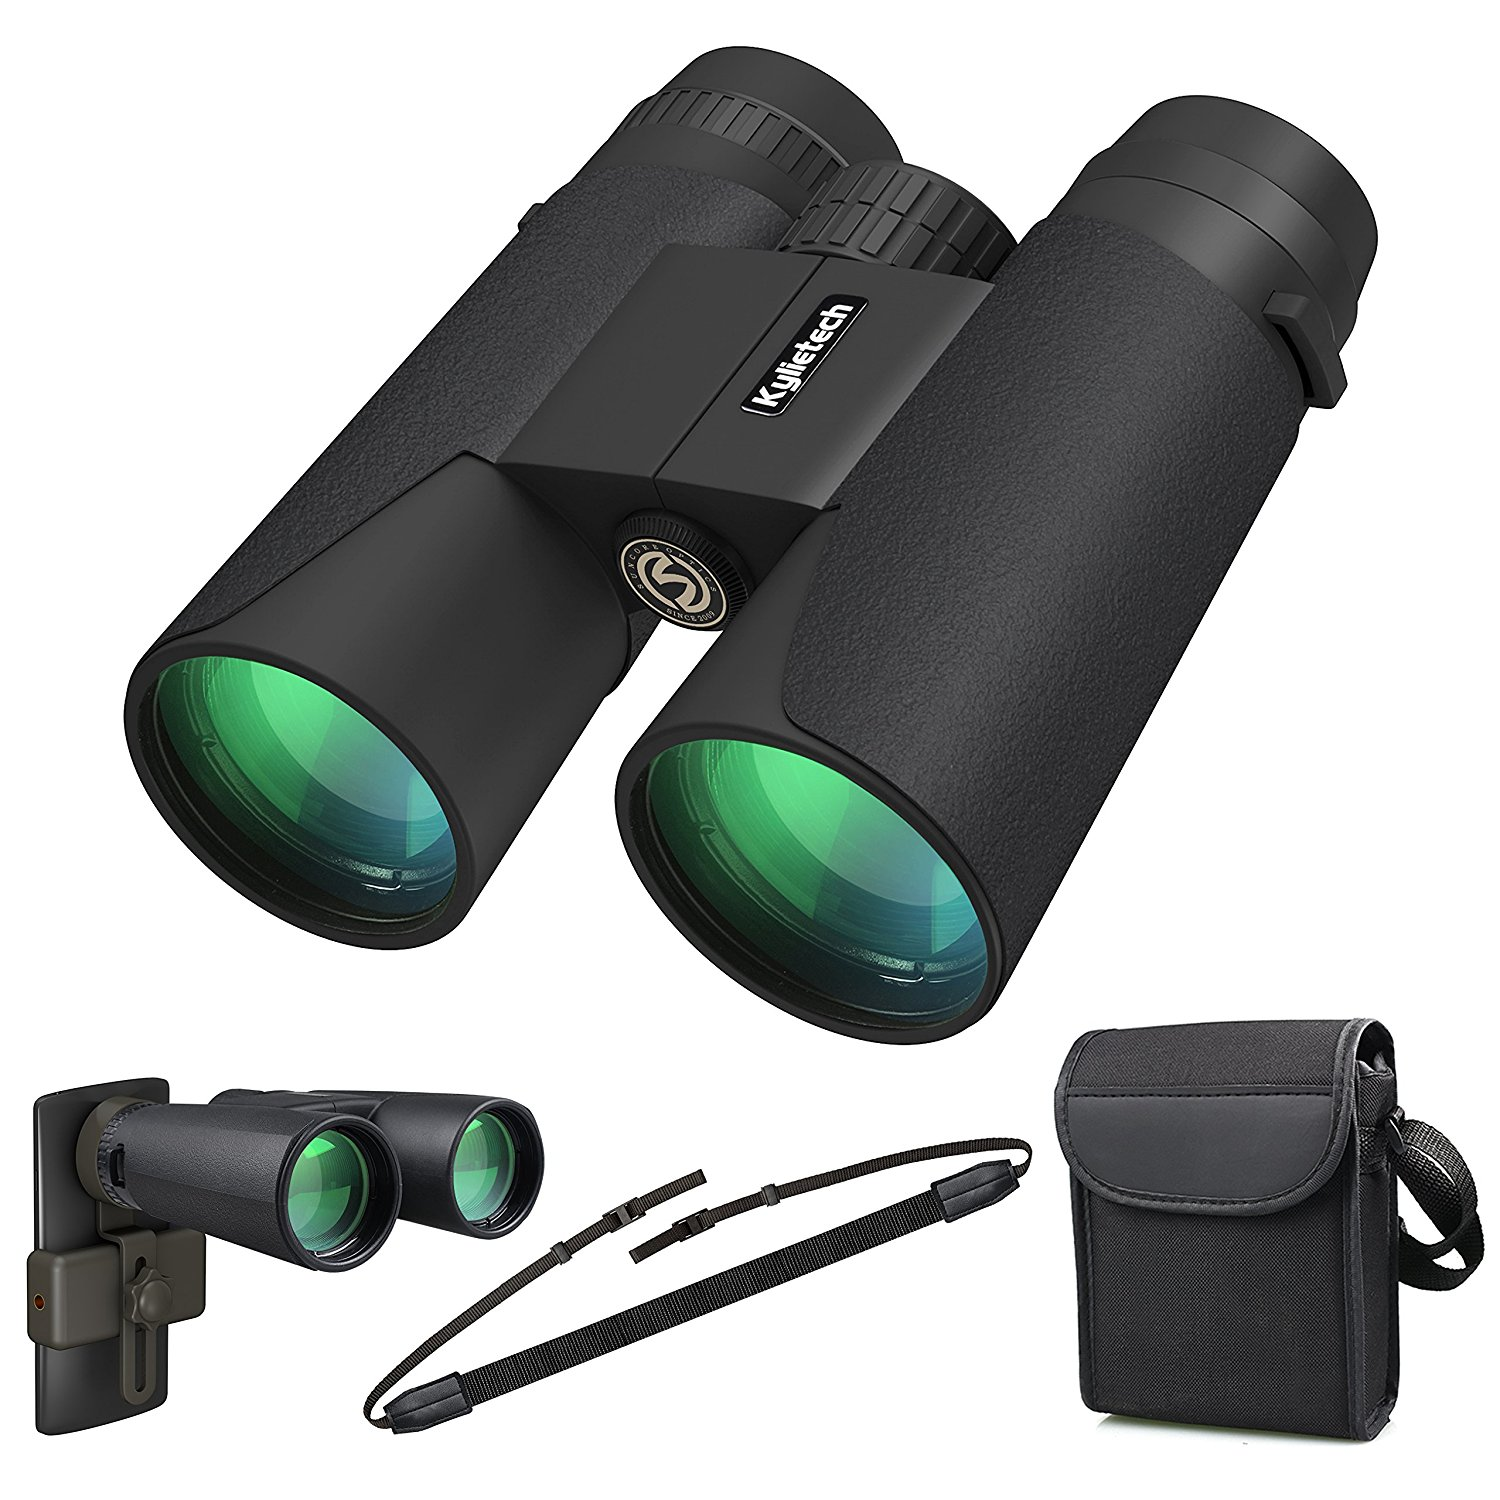 Wanna ball on a budget? Make your nosebleeds feel like sideline seats with a pair of binoculars.<br><br>A decent pair is up for grabs <a href="https://amzn.to/2P5Qla1" "nofollow" target="_blank">here</a>.